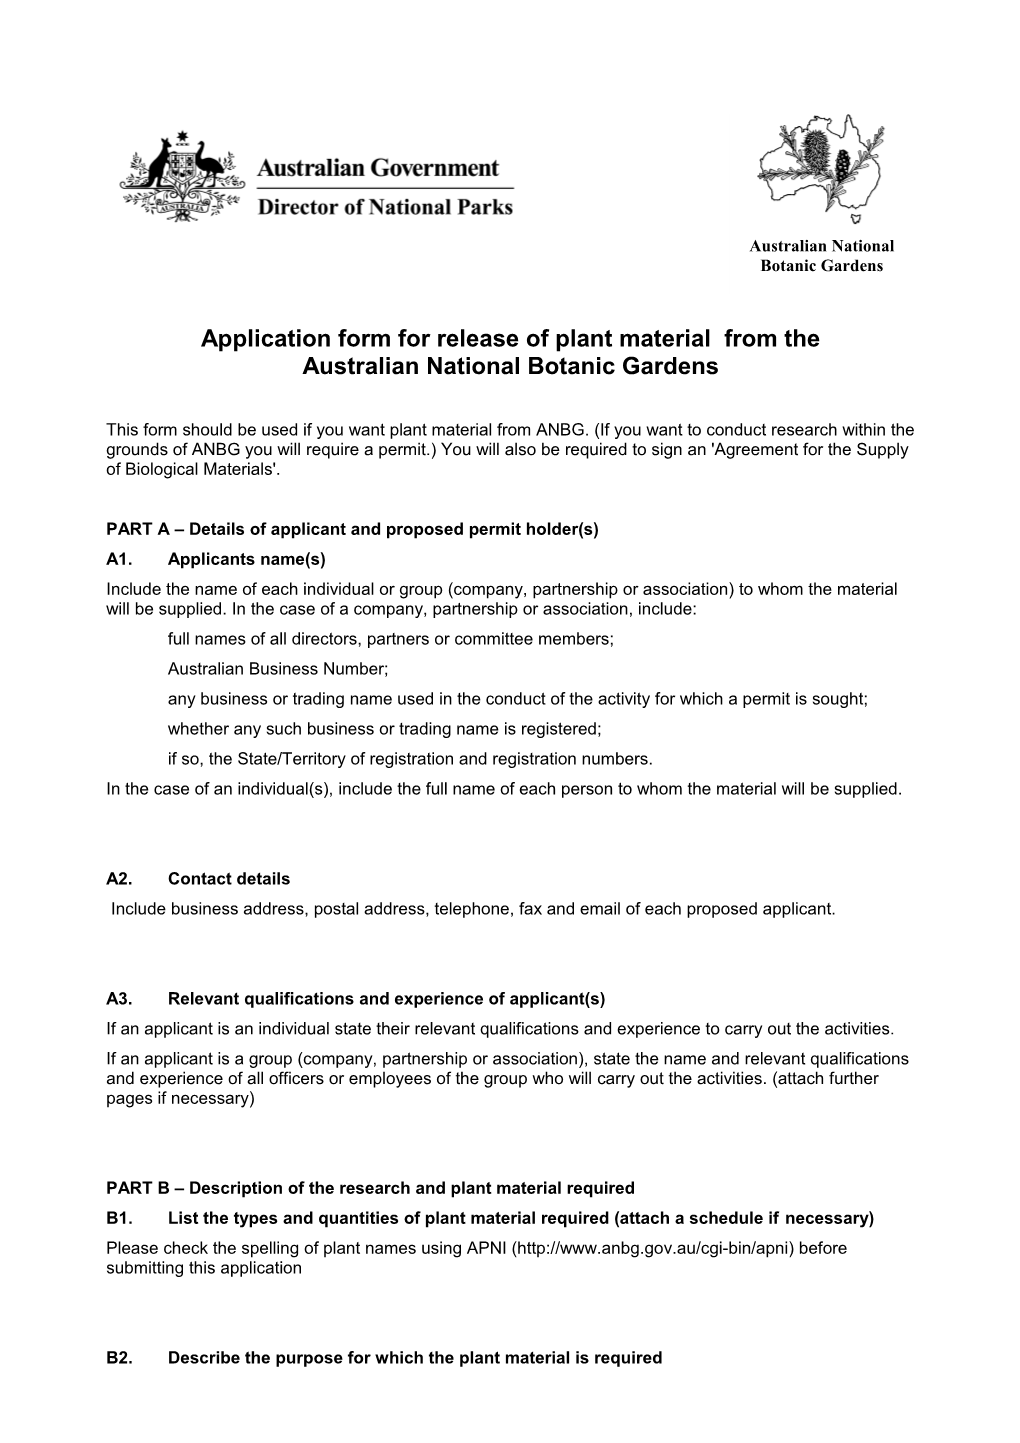 Application Form for Plant Material